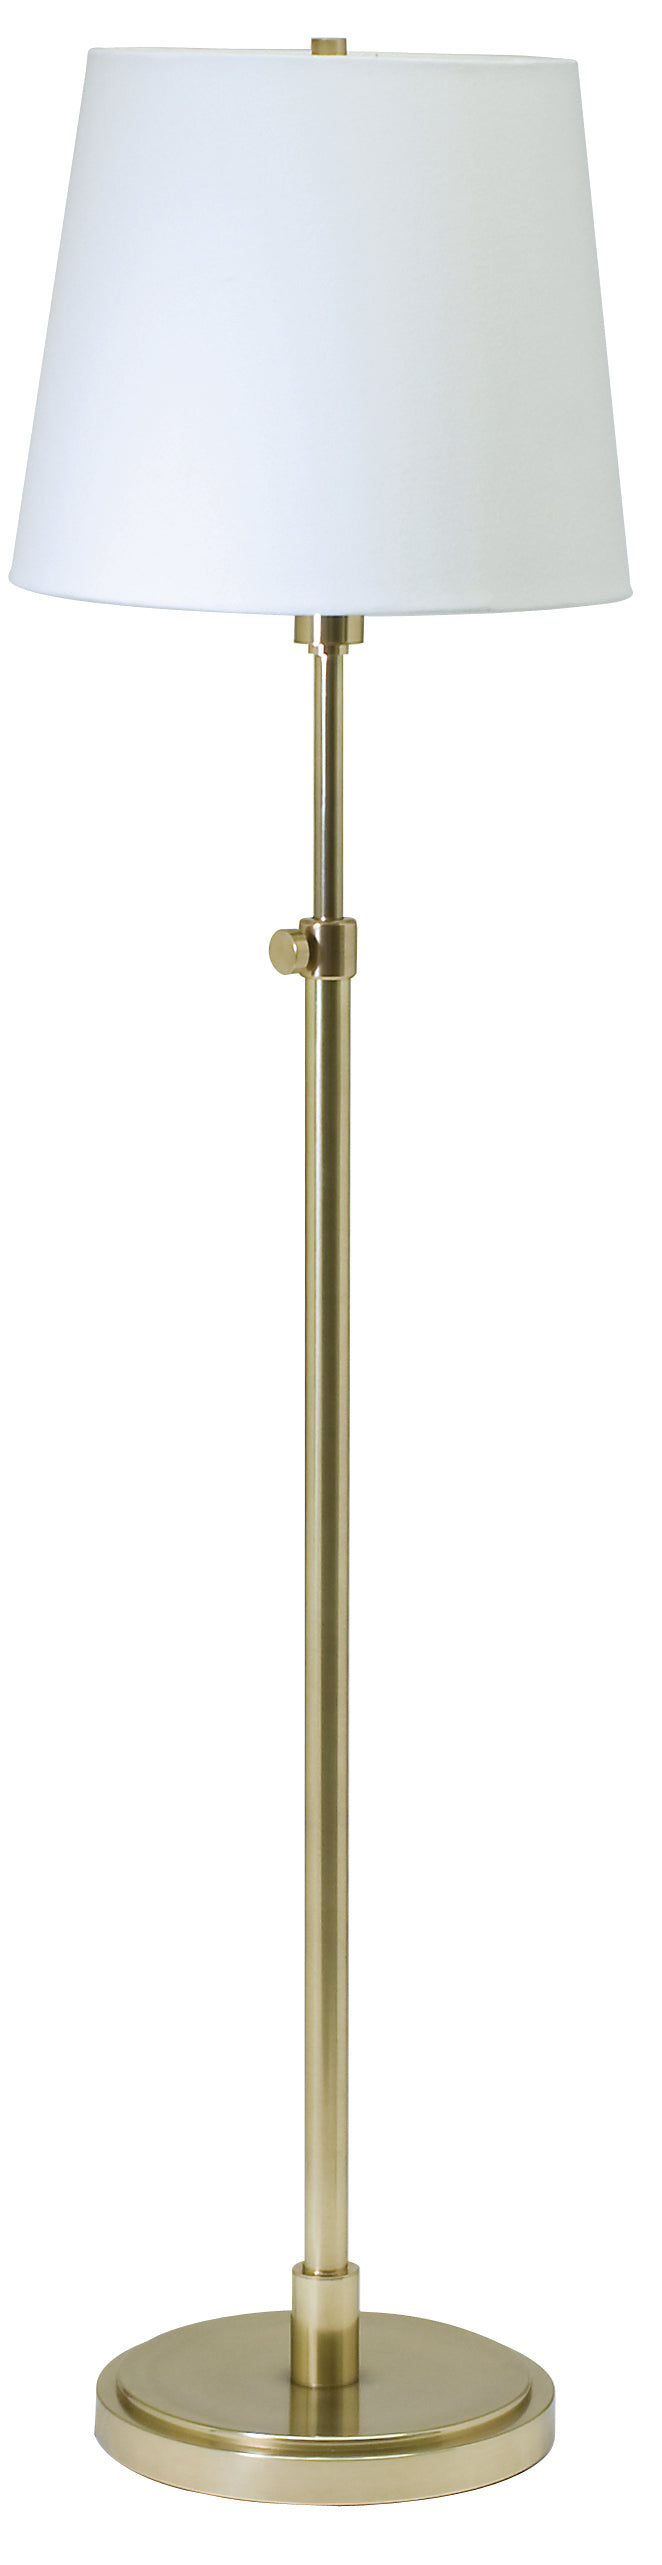 House of Troy Townhouse Adjustable Floor Lamp Raw Brass TH701-RB